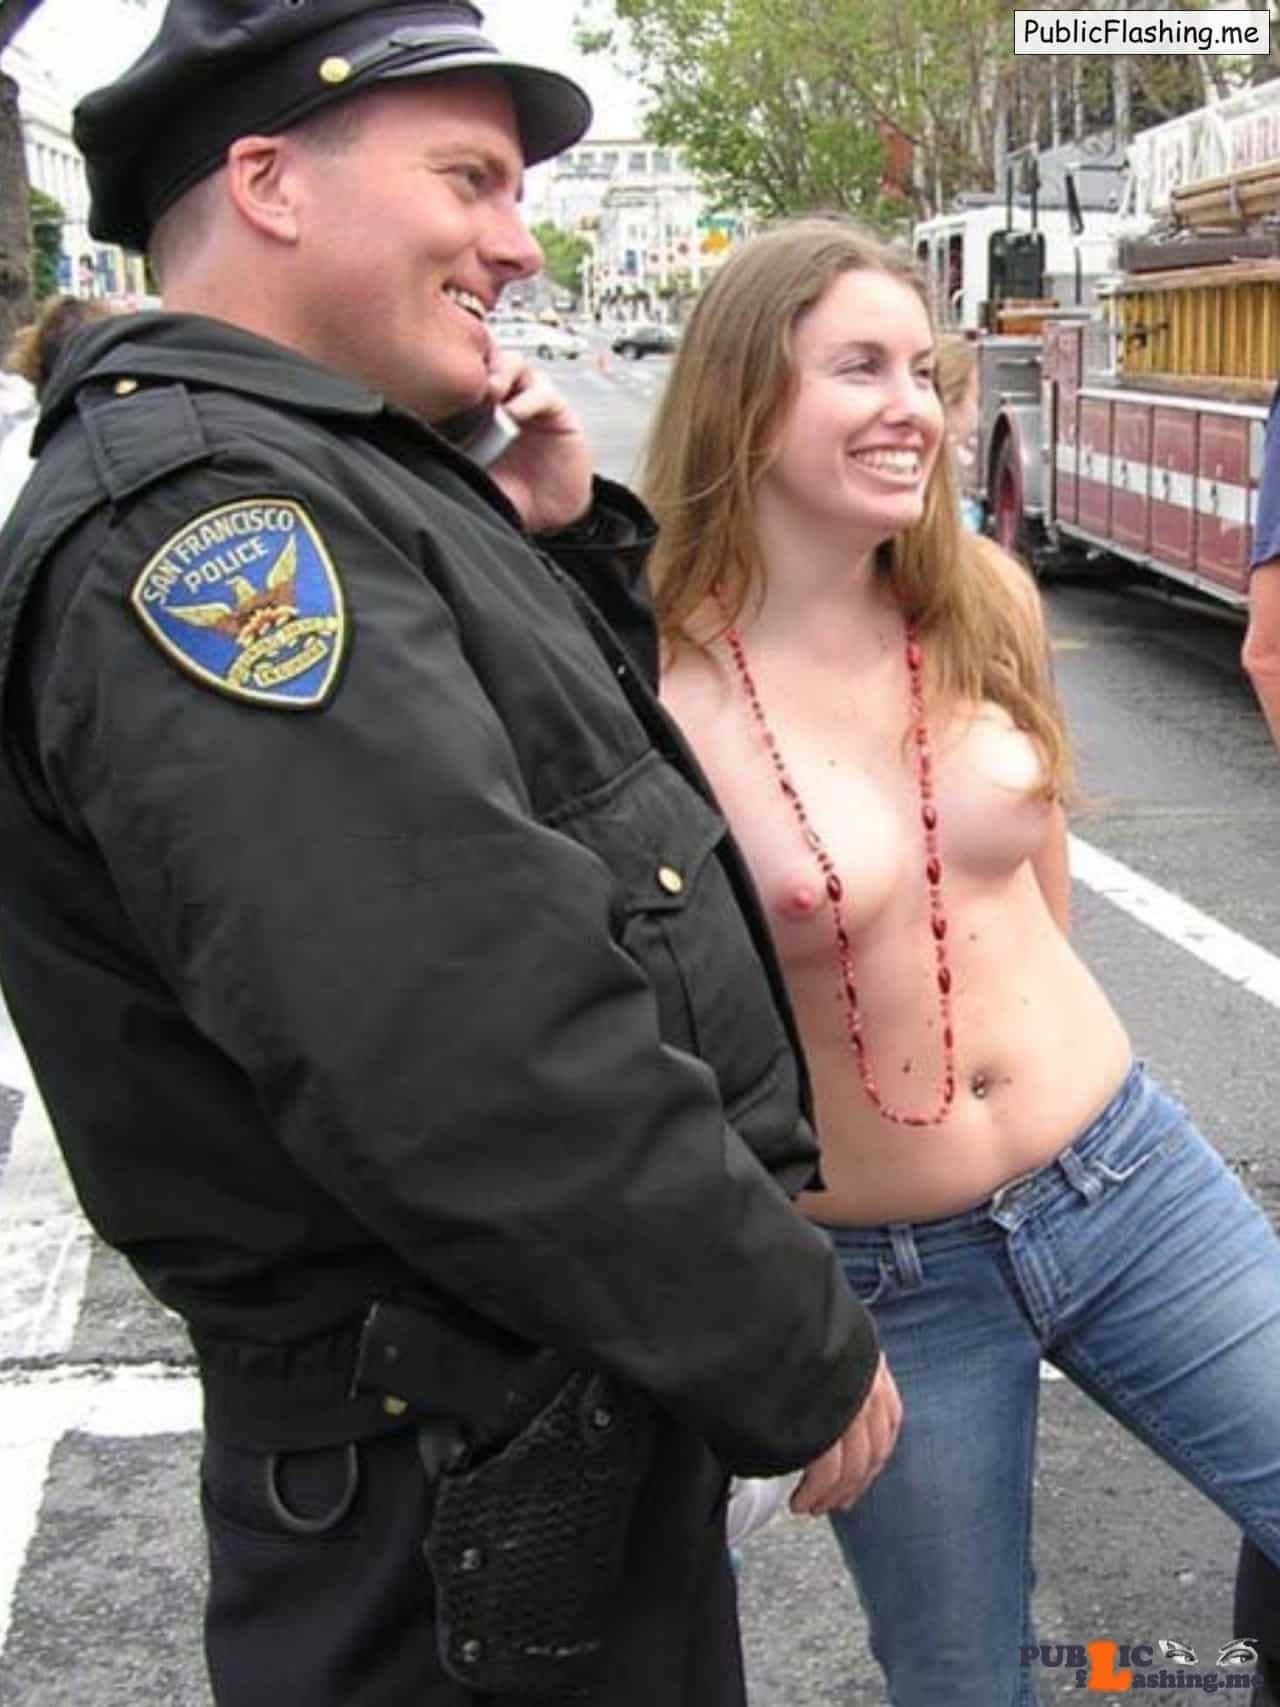 Public Flashing Pictures College pics College Boobs pics Boobs Amateur pics Amateur : Photo of topless blonde girl and a police officer on the streets of San Francisco. Some cop would arrest this girl immediately but this one obviously was charmed with this natural babe and her  boobies. Big smile on girl’s face is...